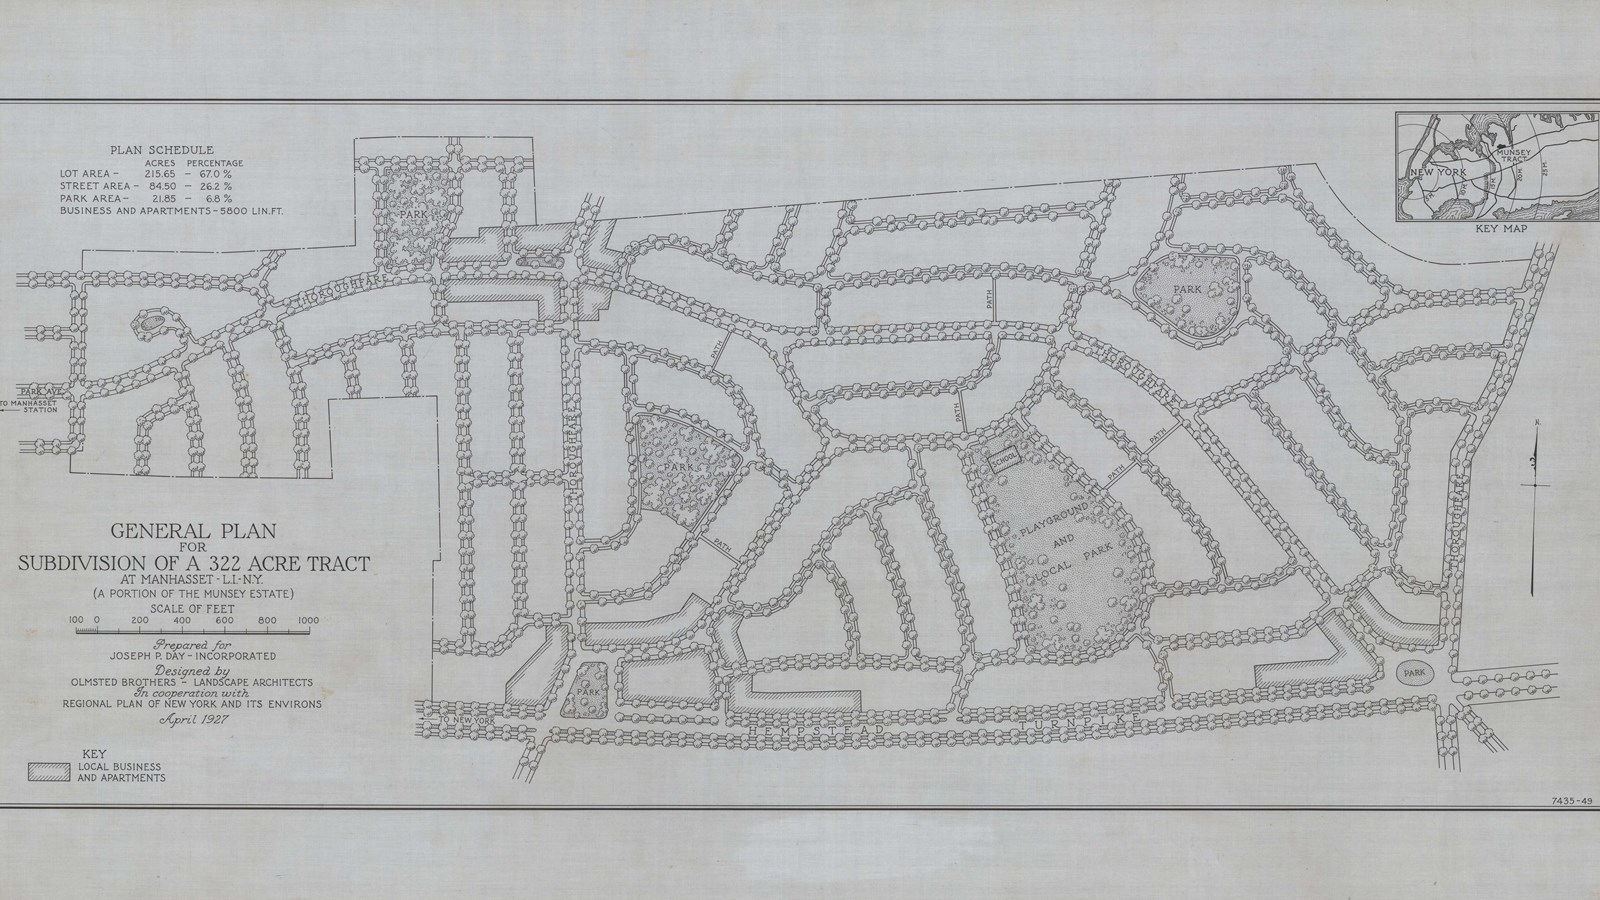 Pencil plan of community with lots of curving streets lined with trees and four park areas 